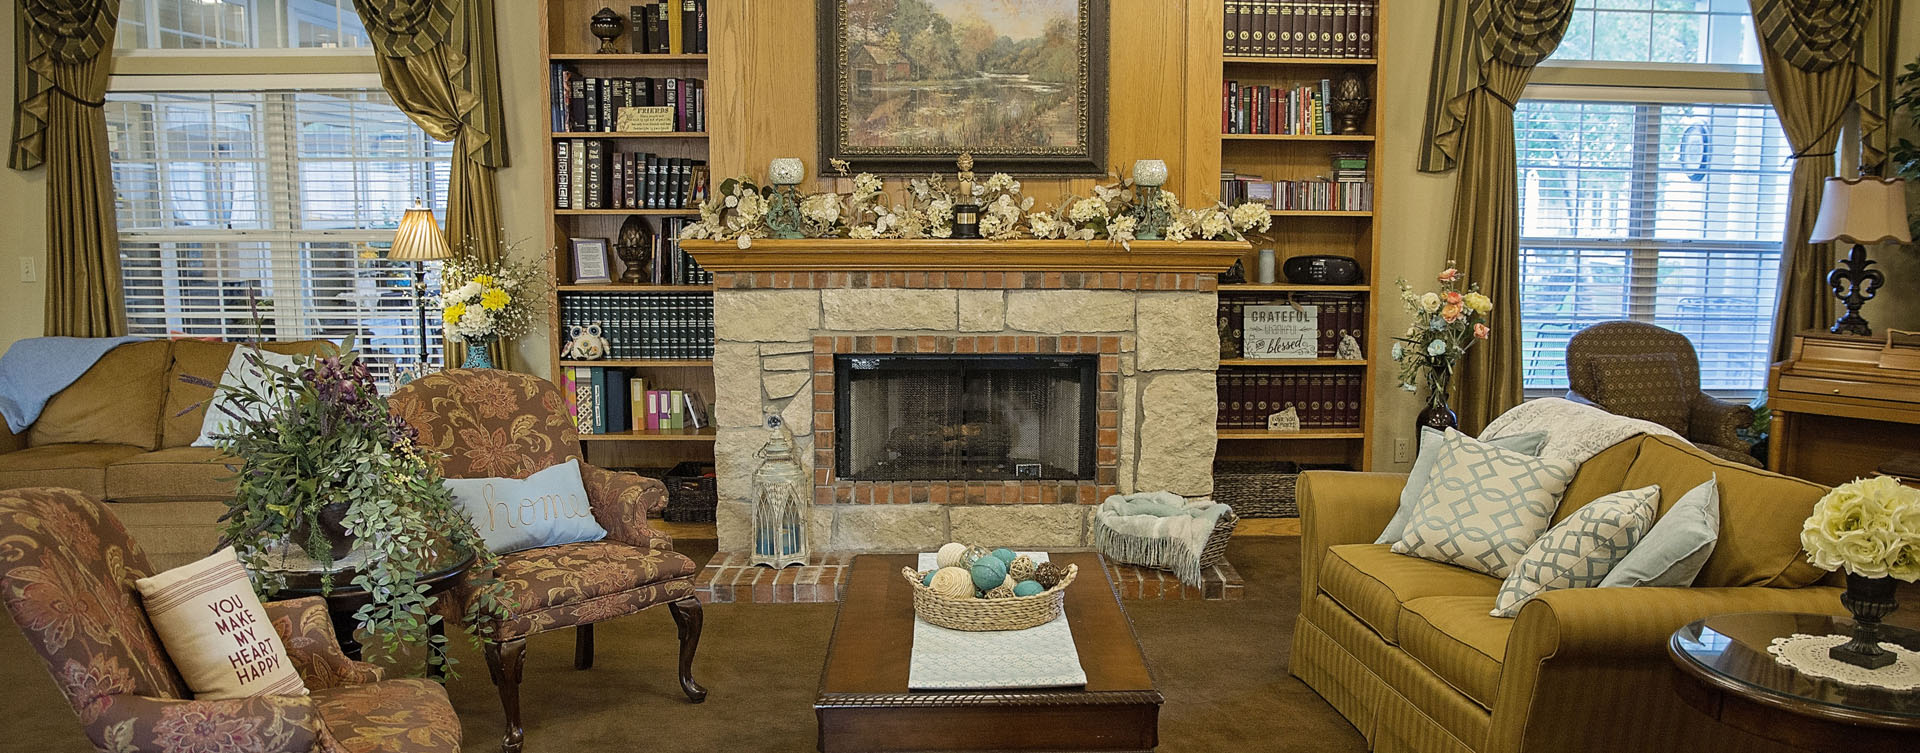 Enjoy a good book in the living room at Bickford of Grand Island